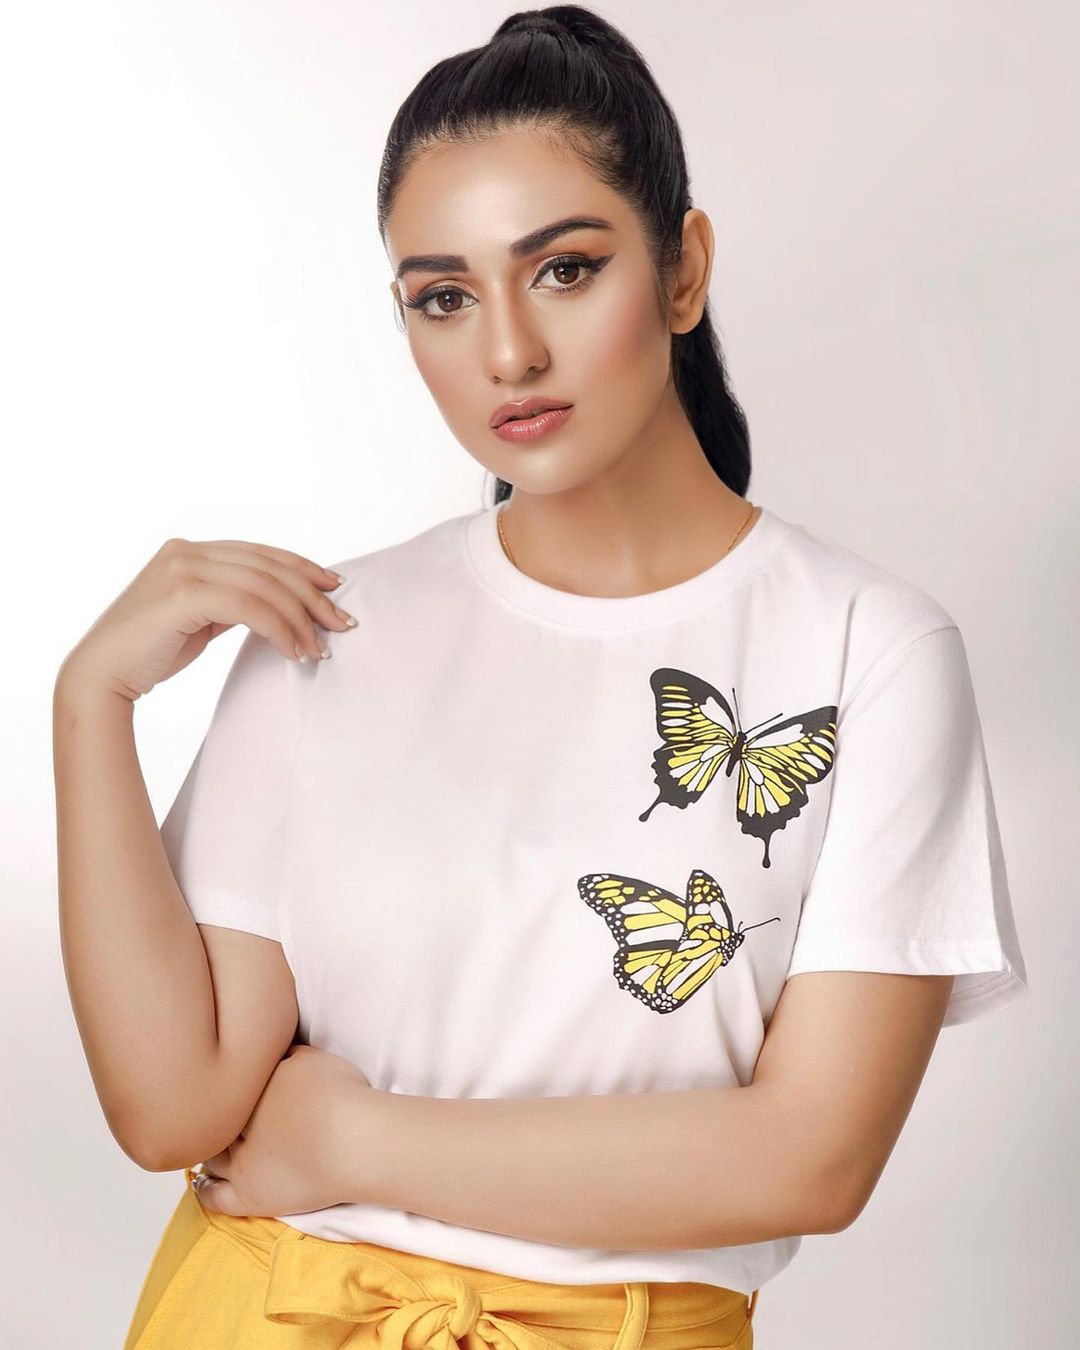 Sarah Khan Looks Super Chic In Shoot For Feathers Clothing | Reviewit.pk